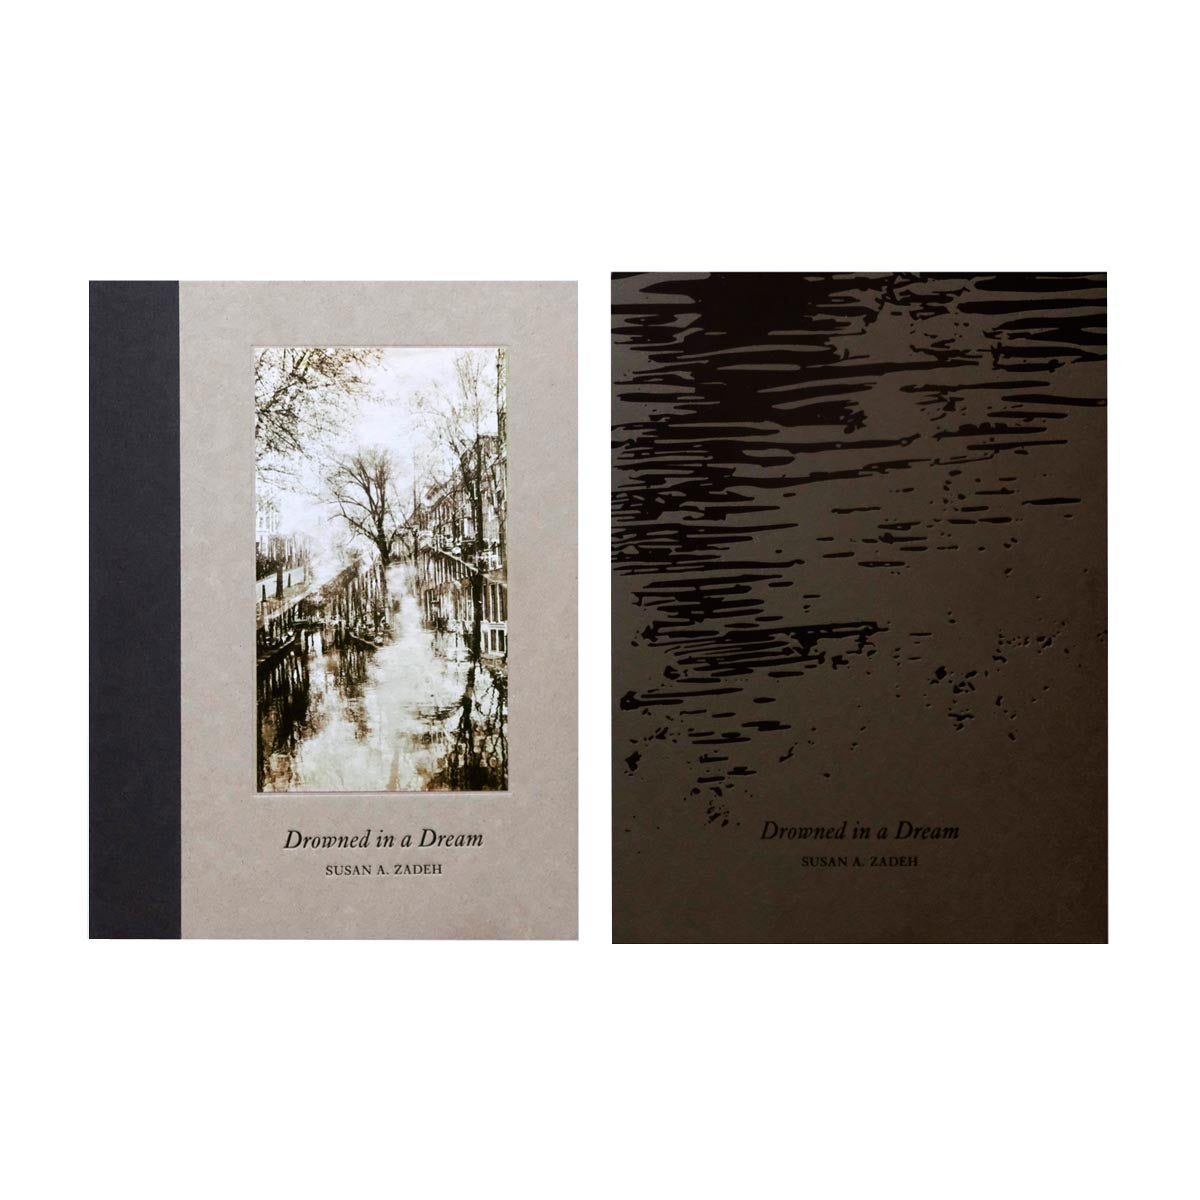 Susan A. Zadeh: Drowned in a Dream (Deluxe Limited Edition with 12 Prints)